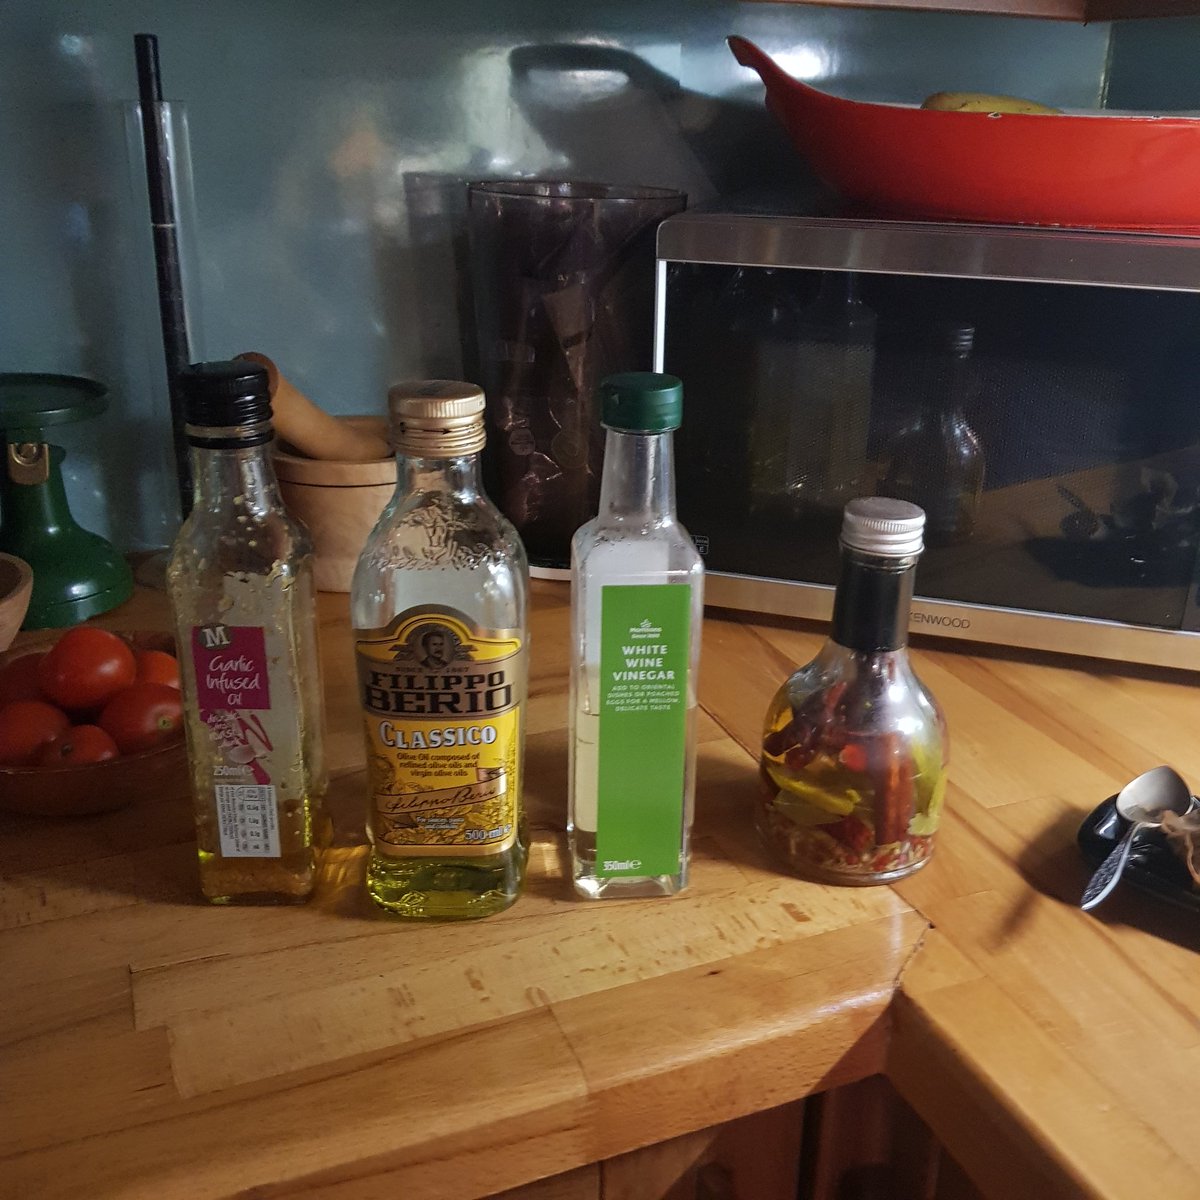 I have absolutely no idea at this point what is about to go into this dressing, but the bottle on the end has been knocking around long enough to need using, and it appears to have chilli's in it so what could go wrong?